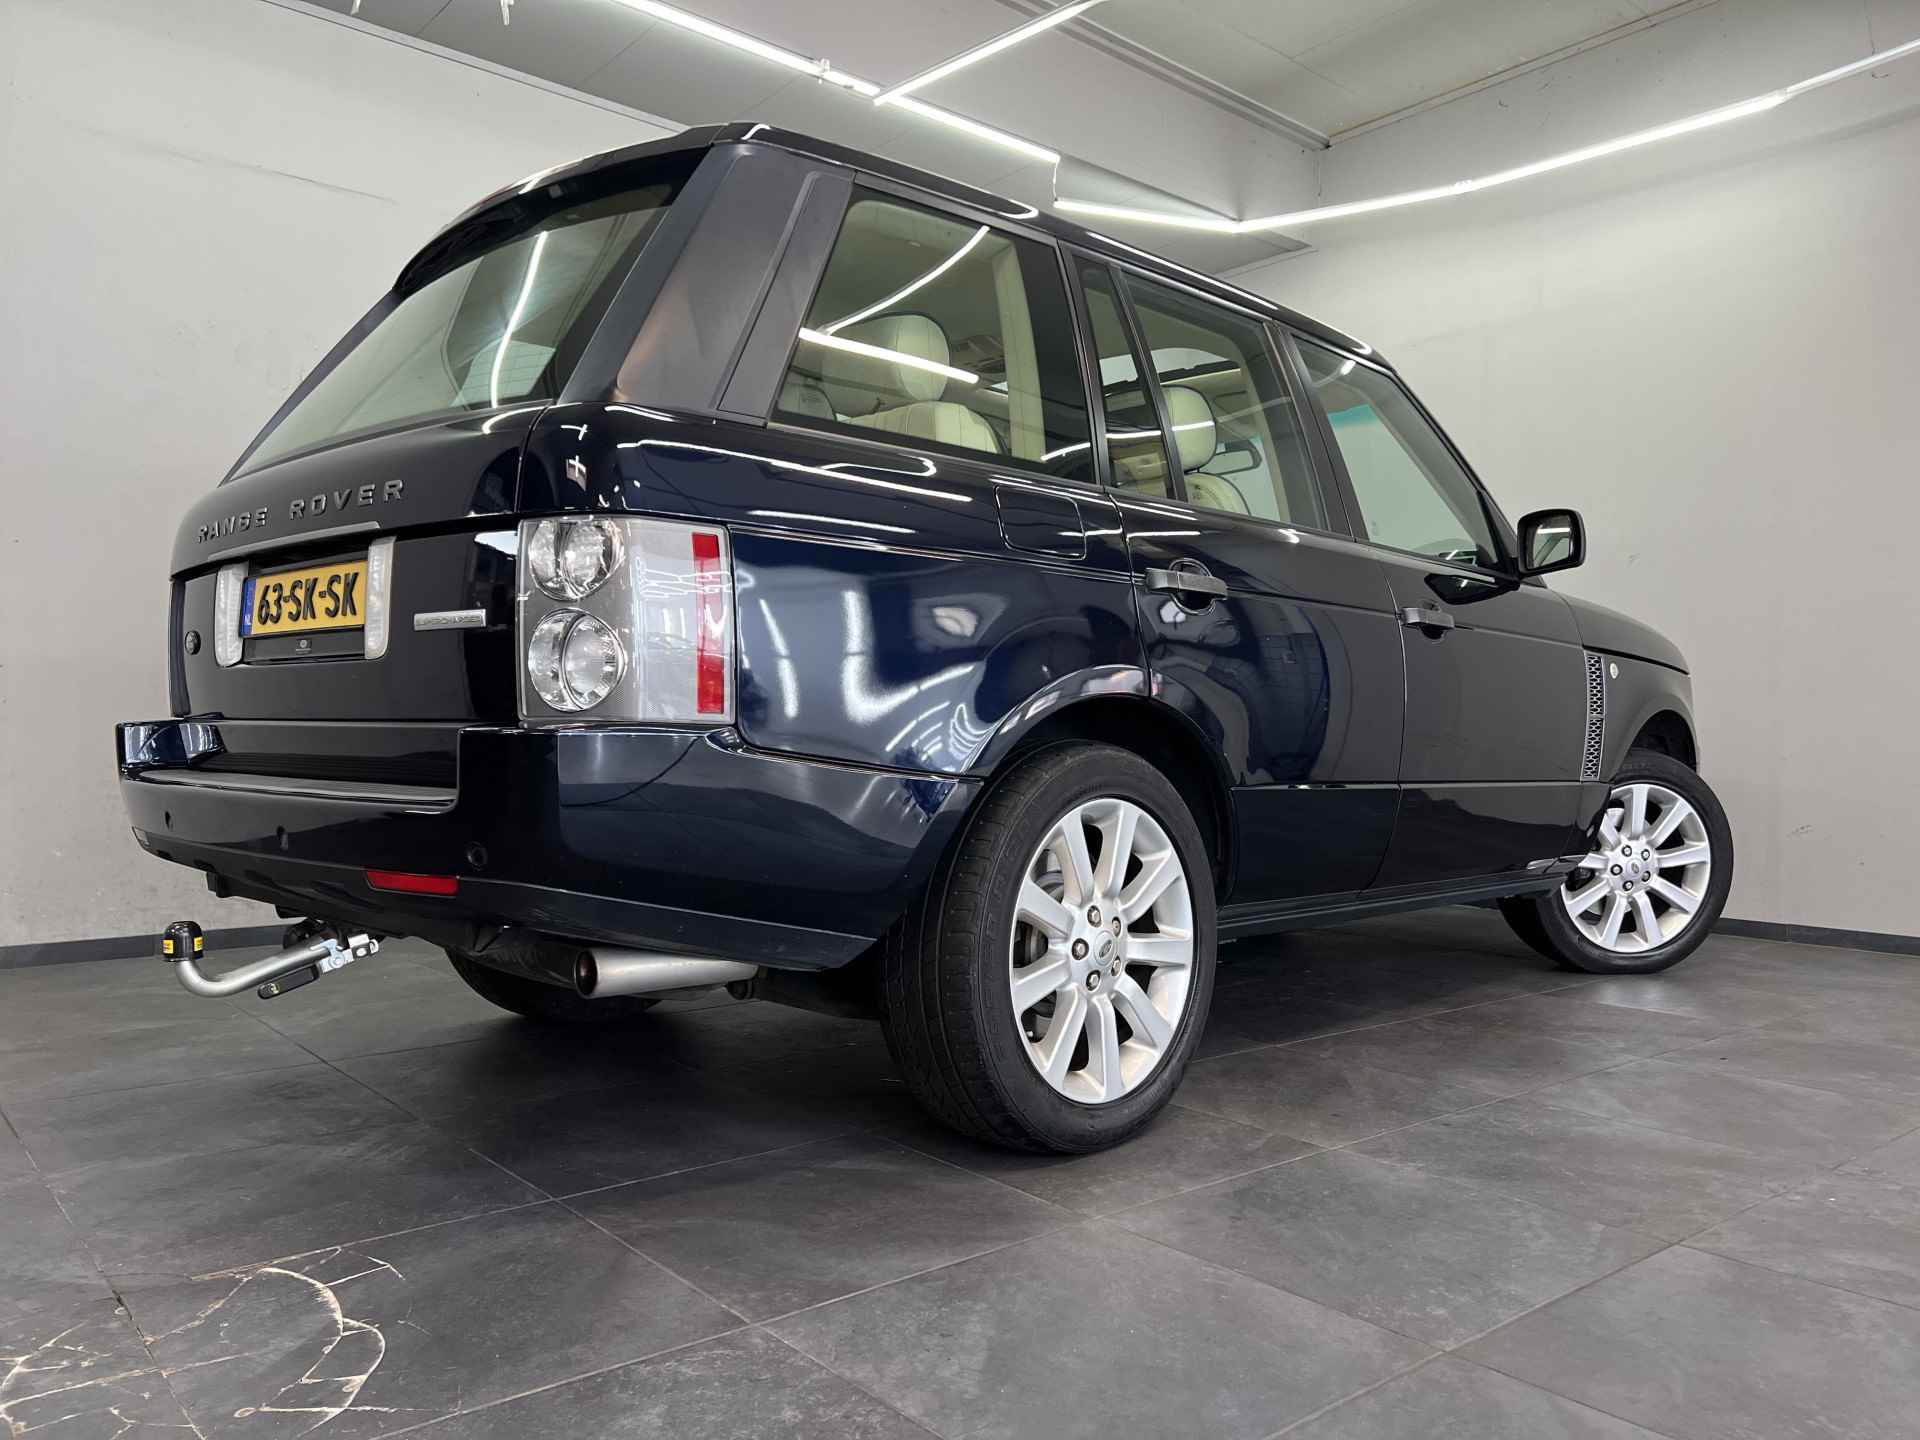 Land Rover Range Rover 4.2 V8 Supercharged ✅UNIEKE STAAT✅Airco✅Cruise controle✅Navigatie✅5 deurs✅TREKHAAK - 21/52